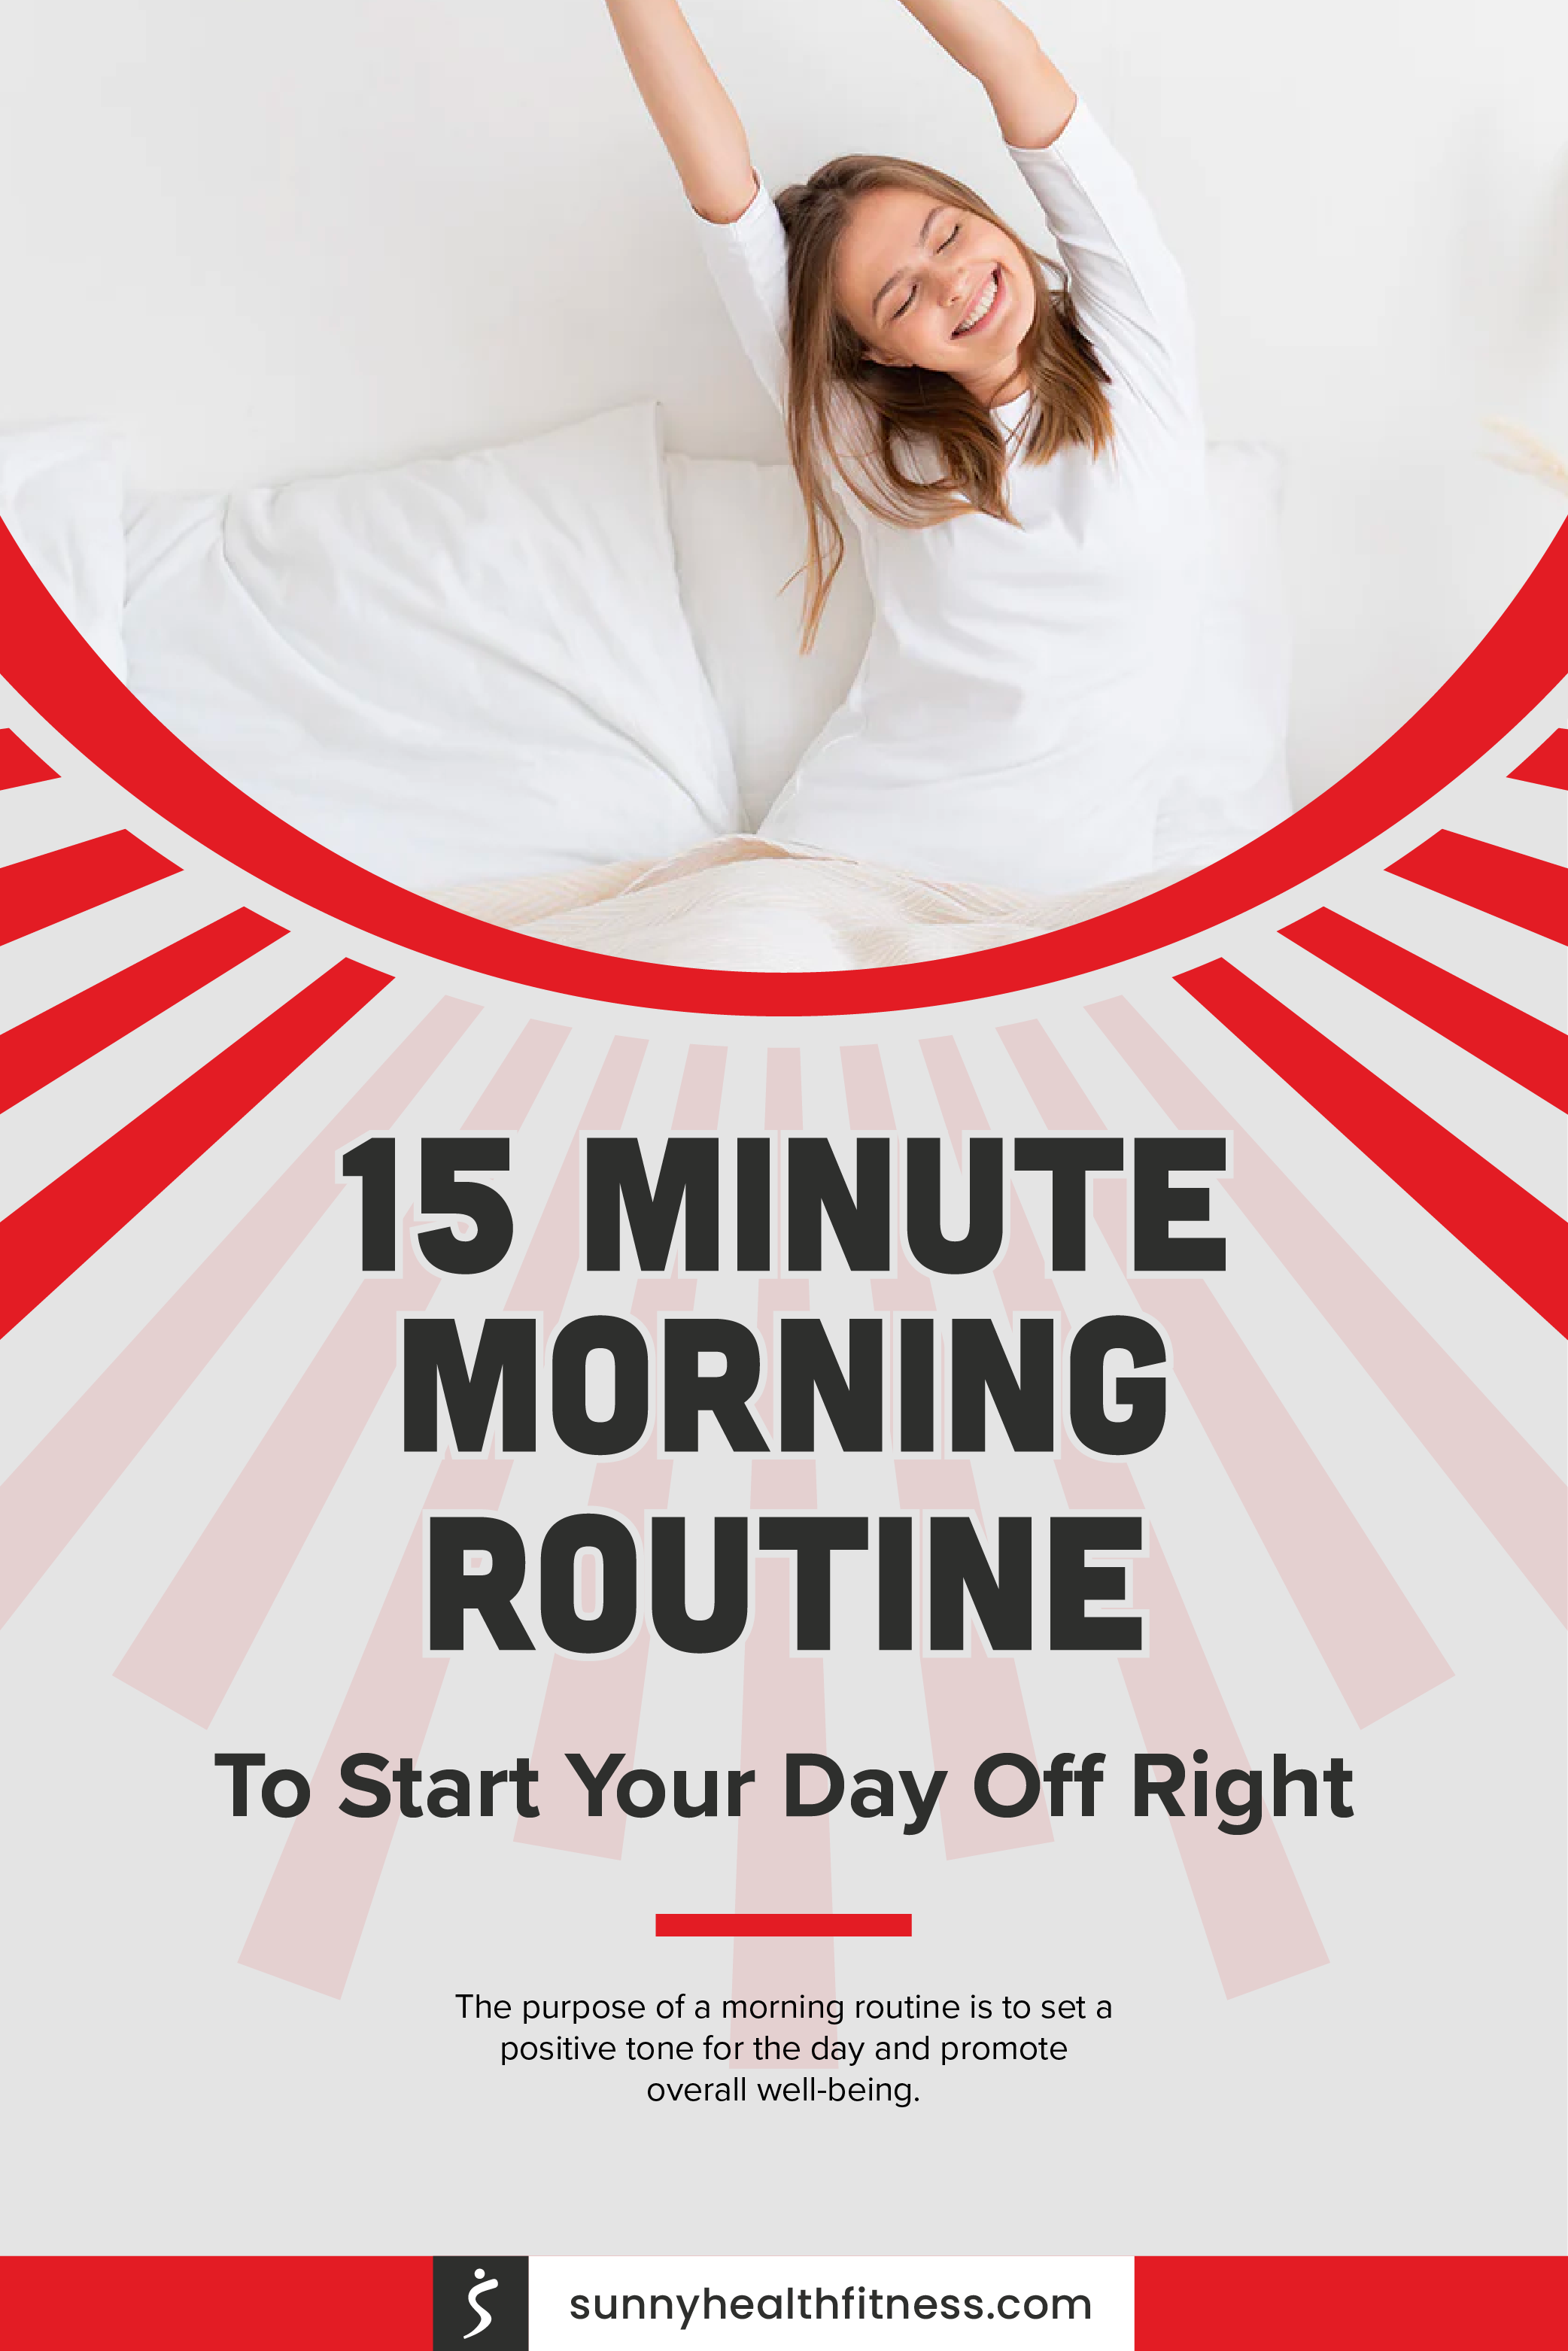 15 Minute Morning Routine to Start Your Day Off Right Infographic